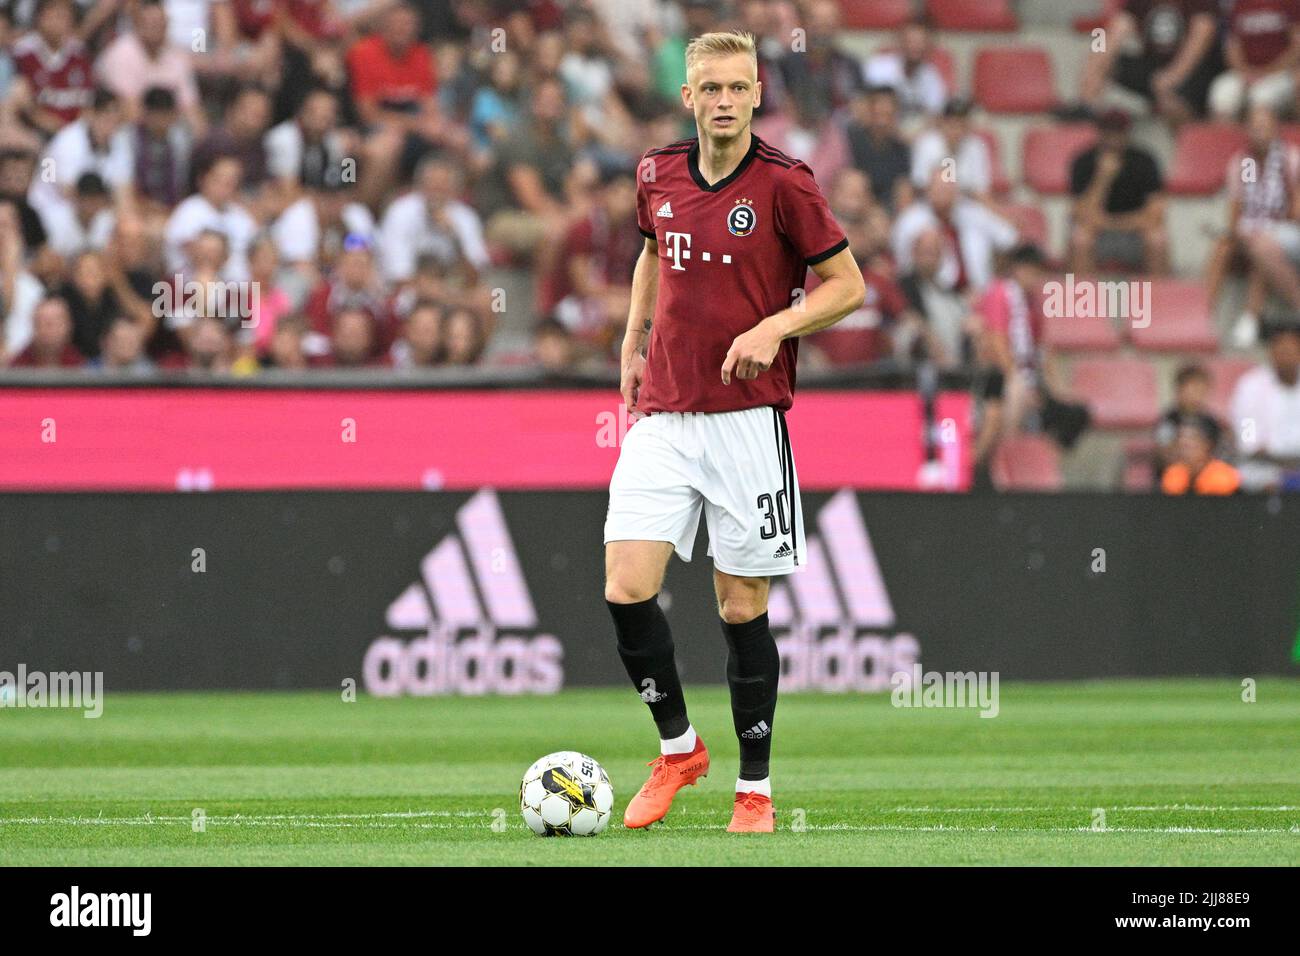 Jaroslav Zeleny of Sparta in action during the European Conference League 2nd qualifying round opening match Sparta Praha vs Viking Stavanger in Pragu Stock Photo